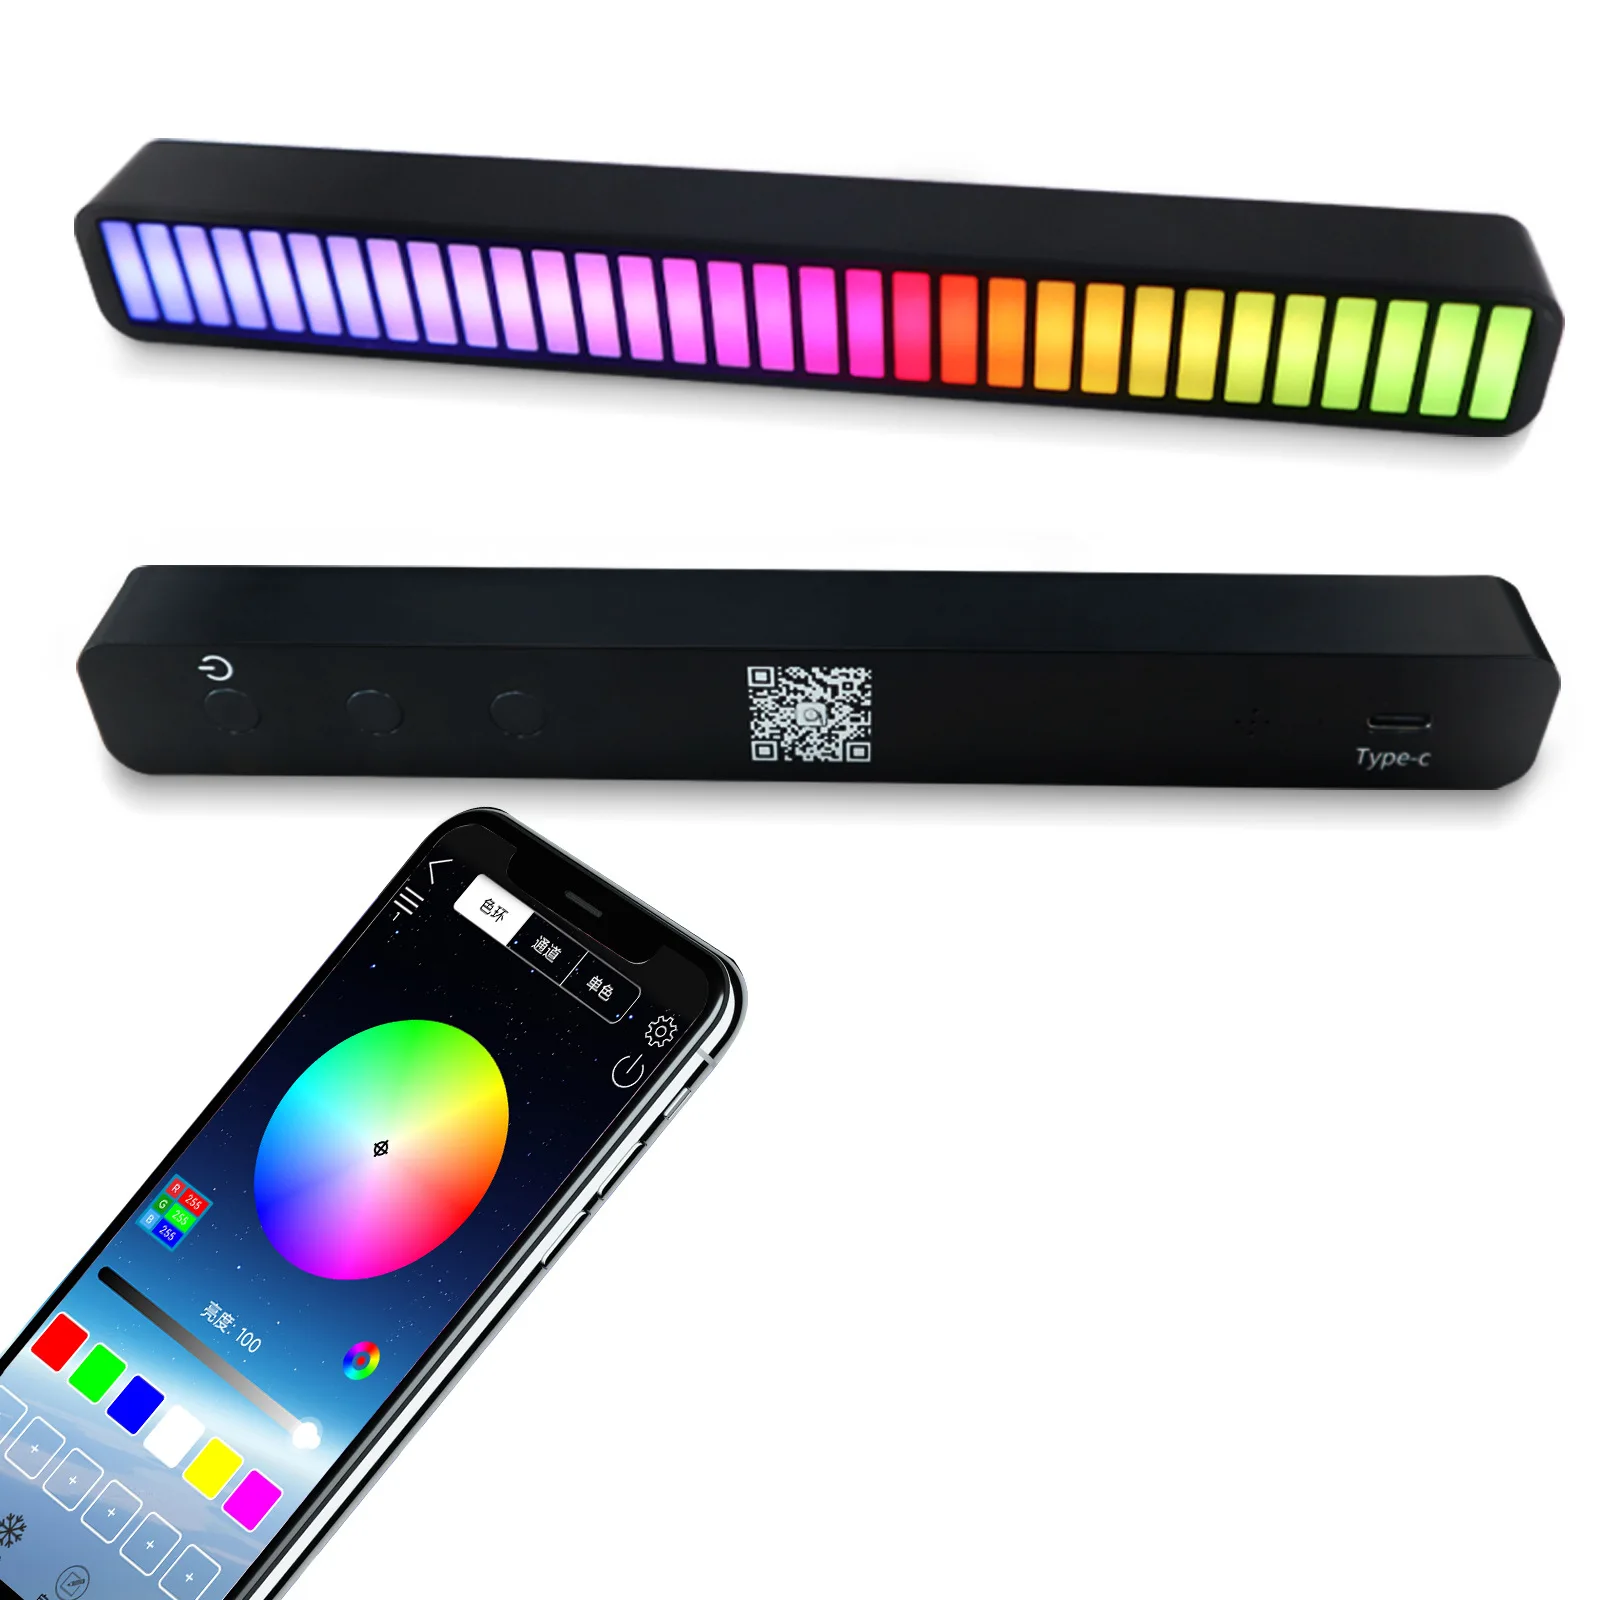 2021Romance Music Rhythm Lamp For Car Office Home Bedroom Sound Control APP Rhythm Beating Level Light Colorful Atmosphere Lamp